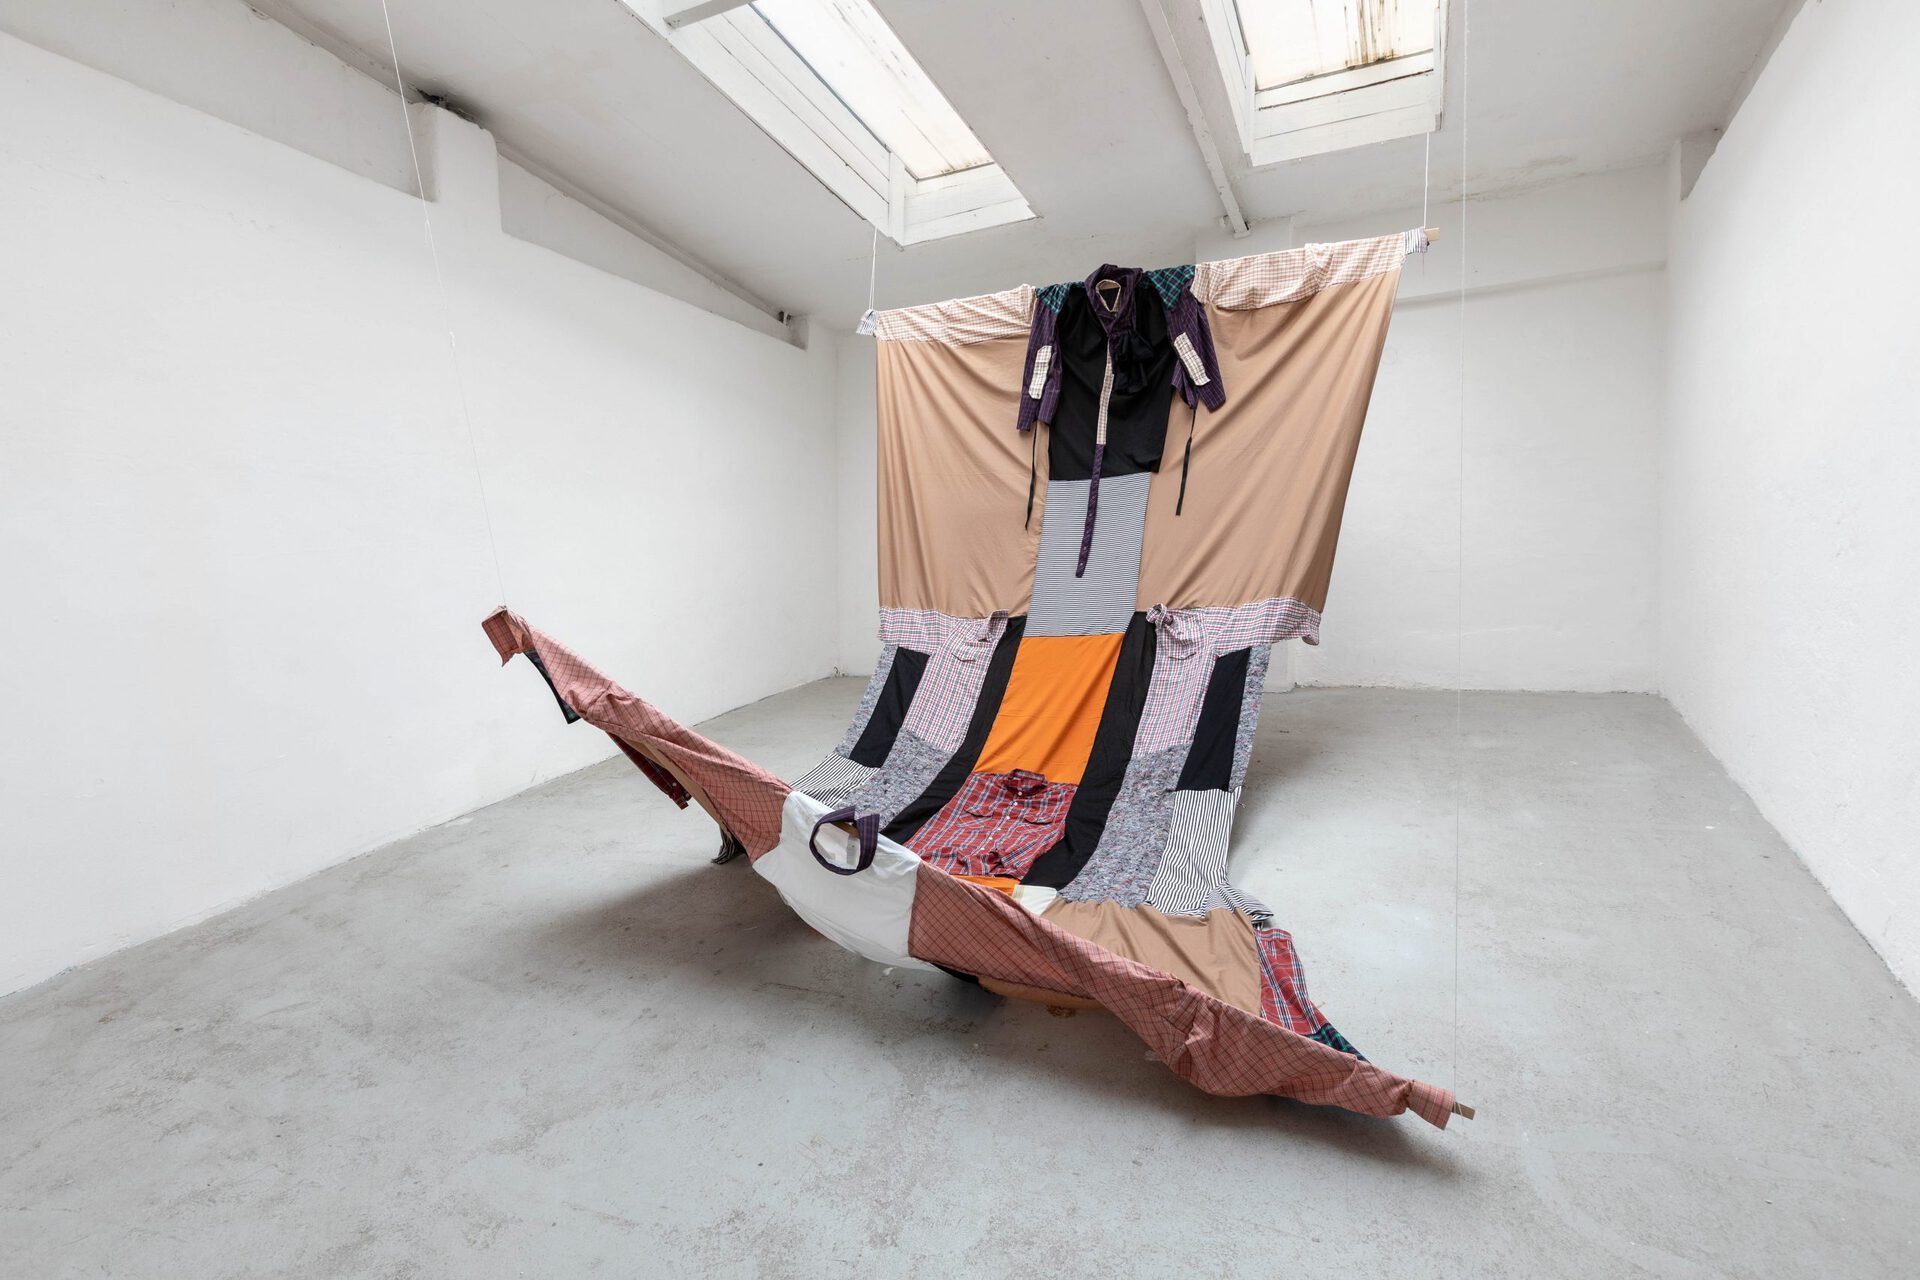 Two-person Flying Suit, 2021 fabric, wood, rope 400 x 280 cm